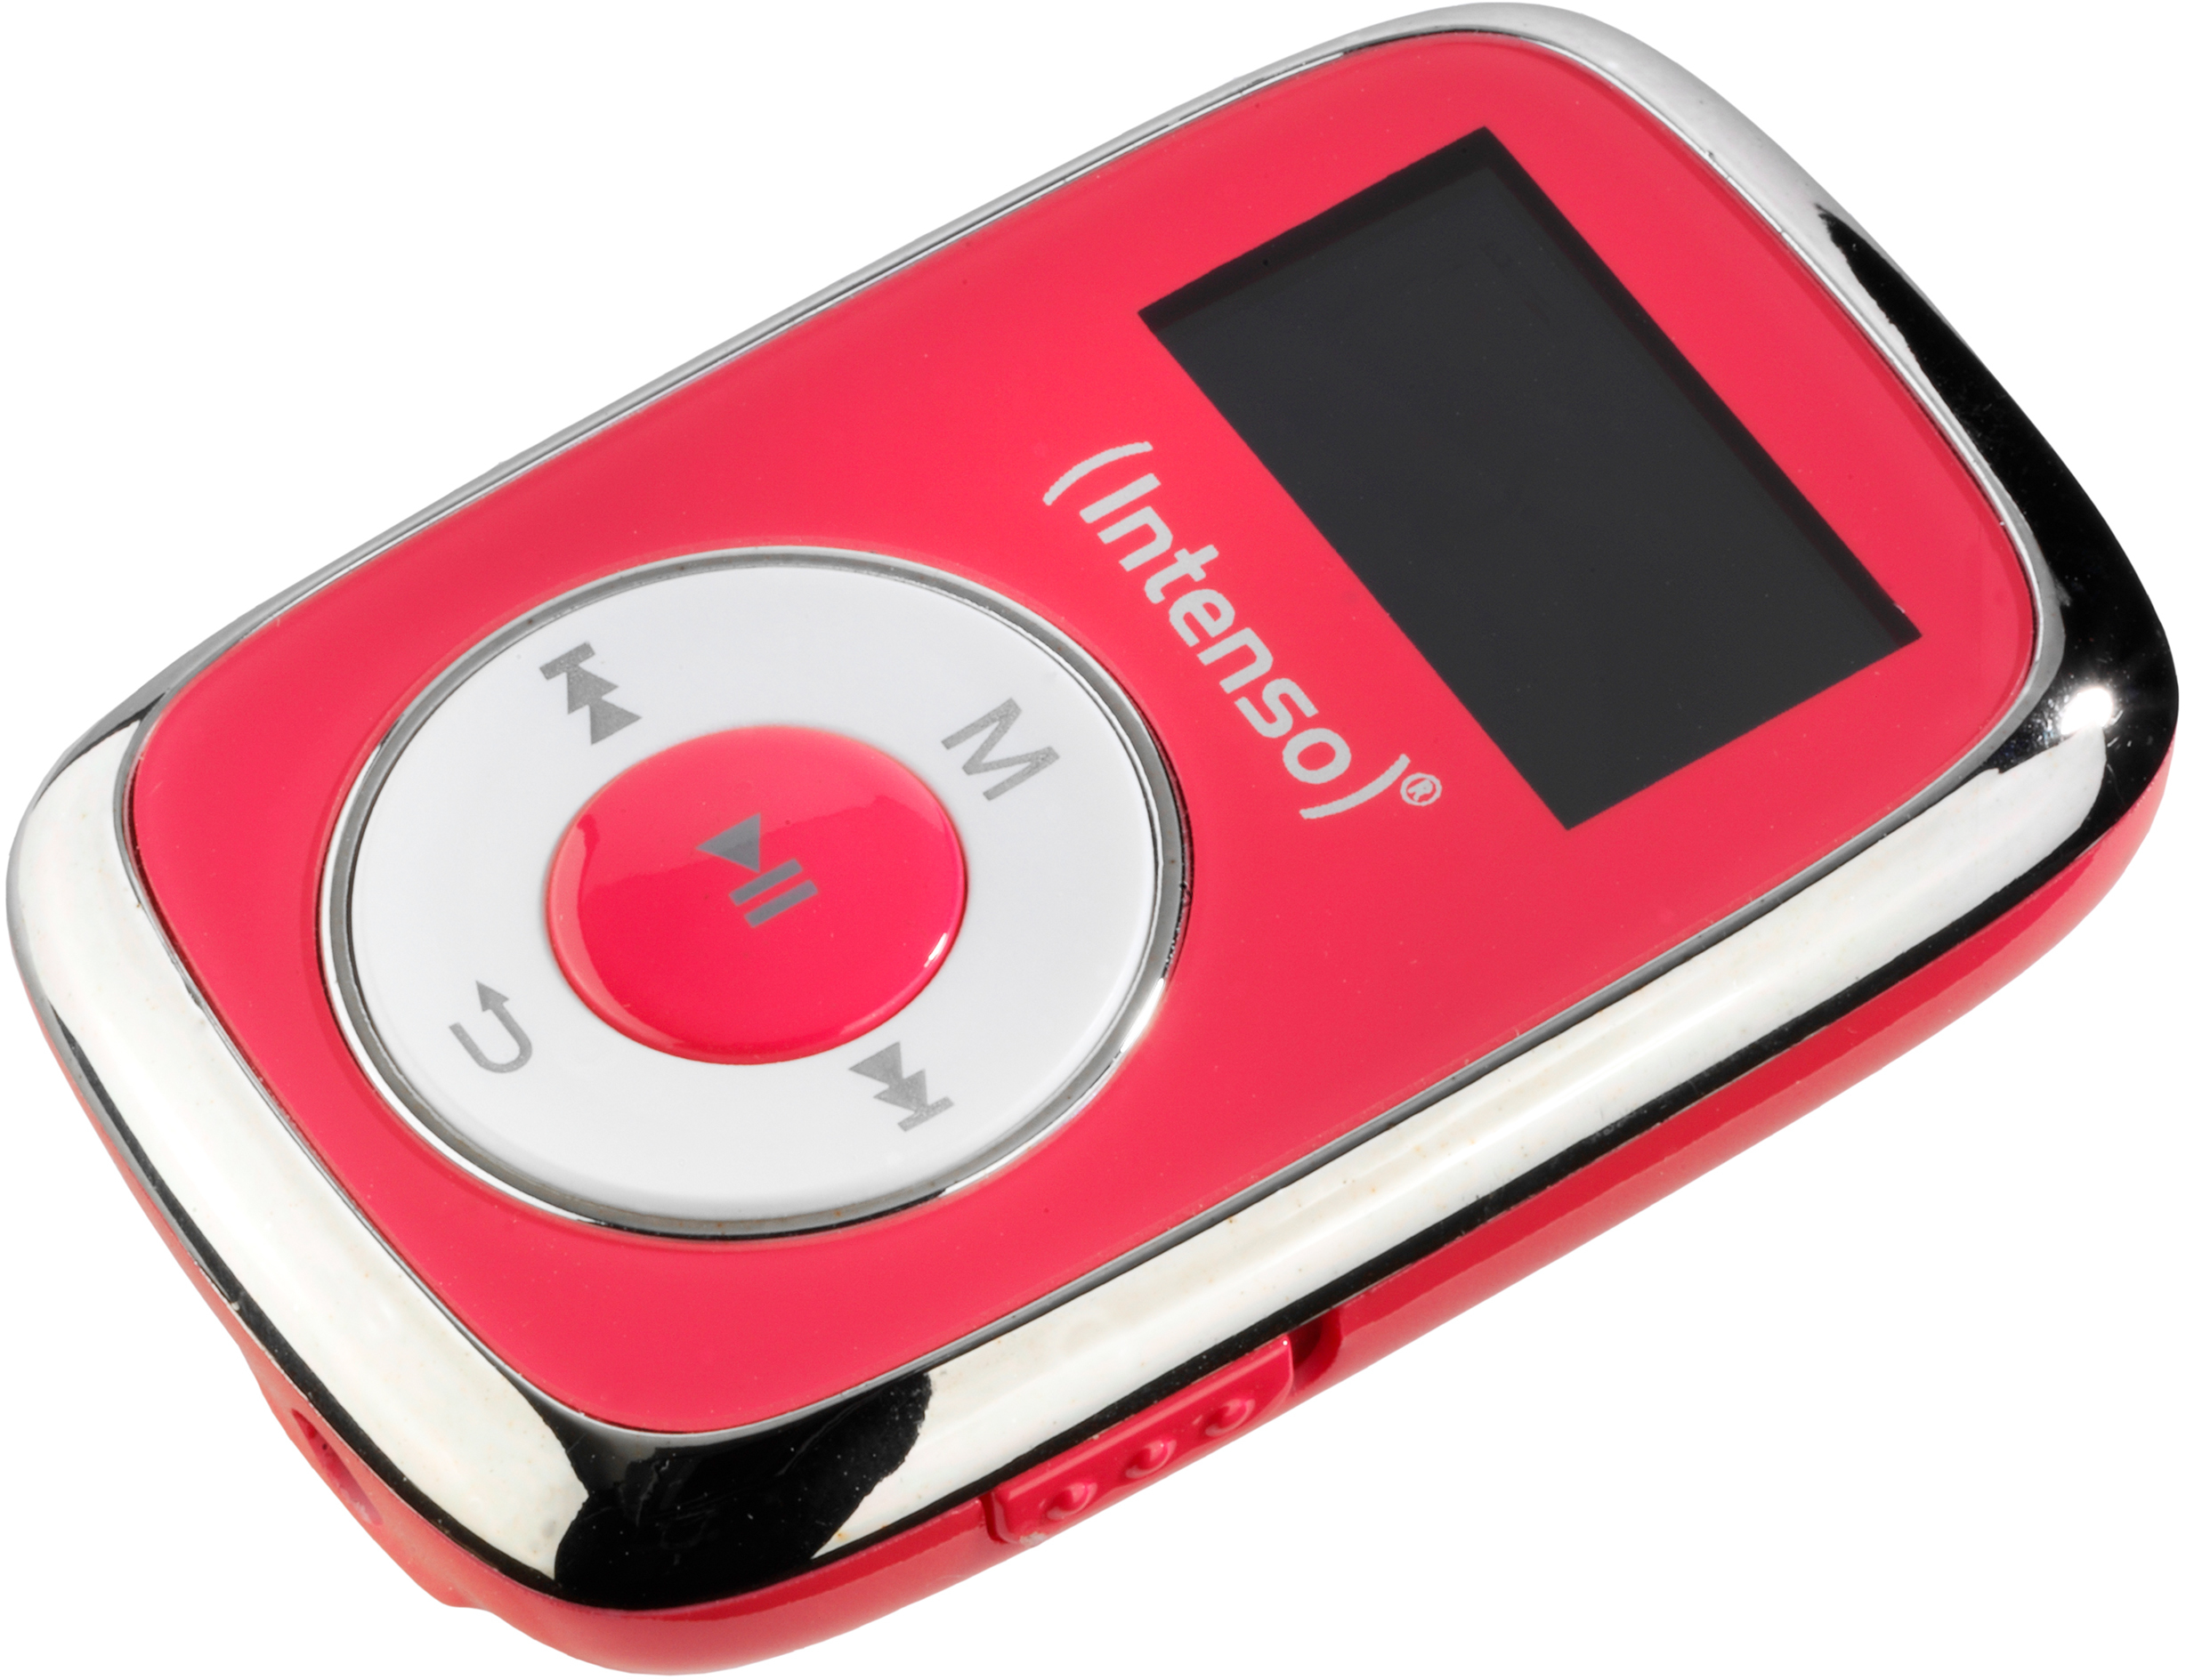 INTENSO Music Mover Mp3-Player Pink) (8 GB